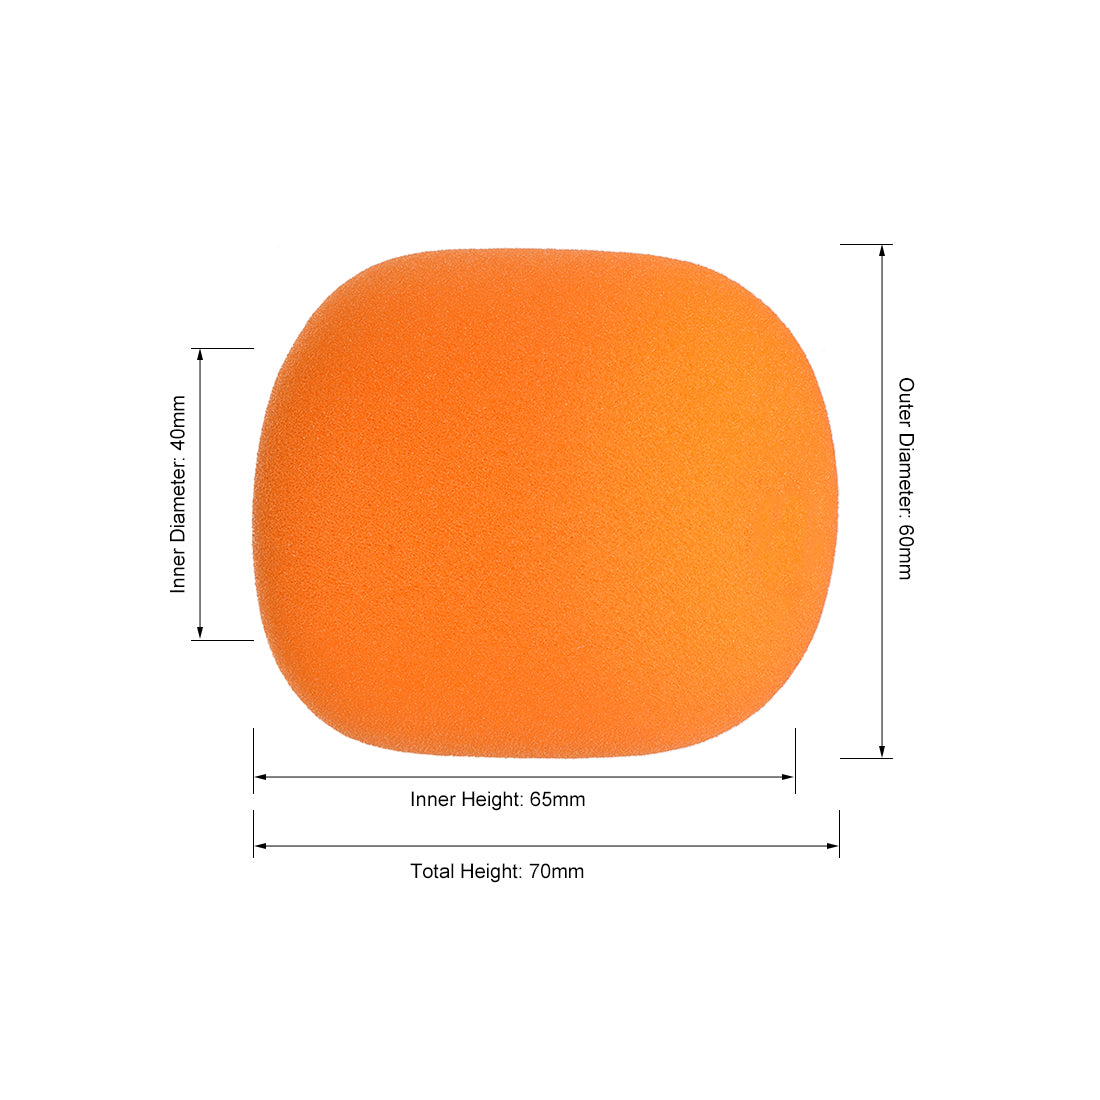 uxcell Uxcell Thicken Sponge Foam Mic Cover Handheld Microphone Windscreen Orange for KTV